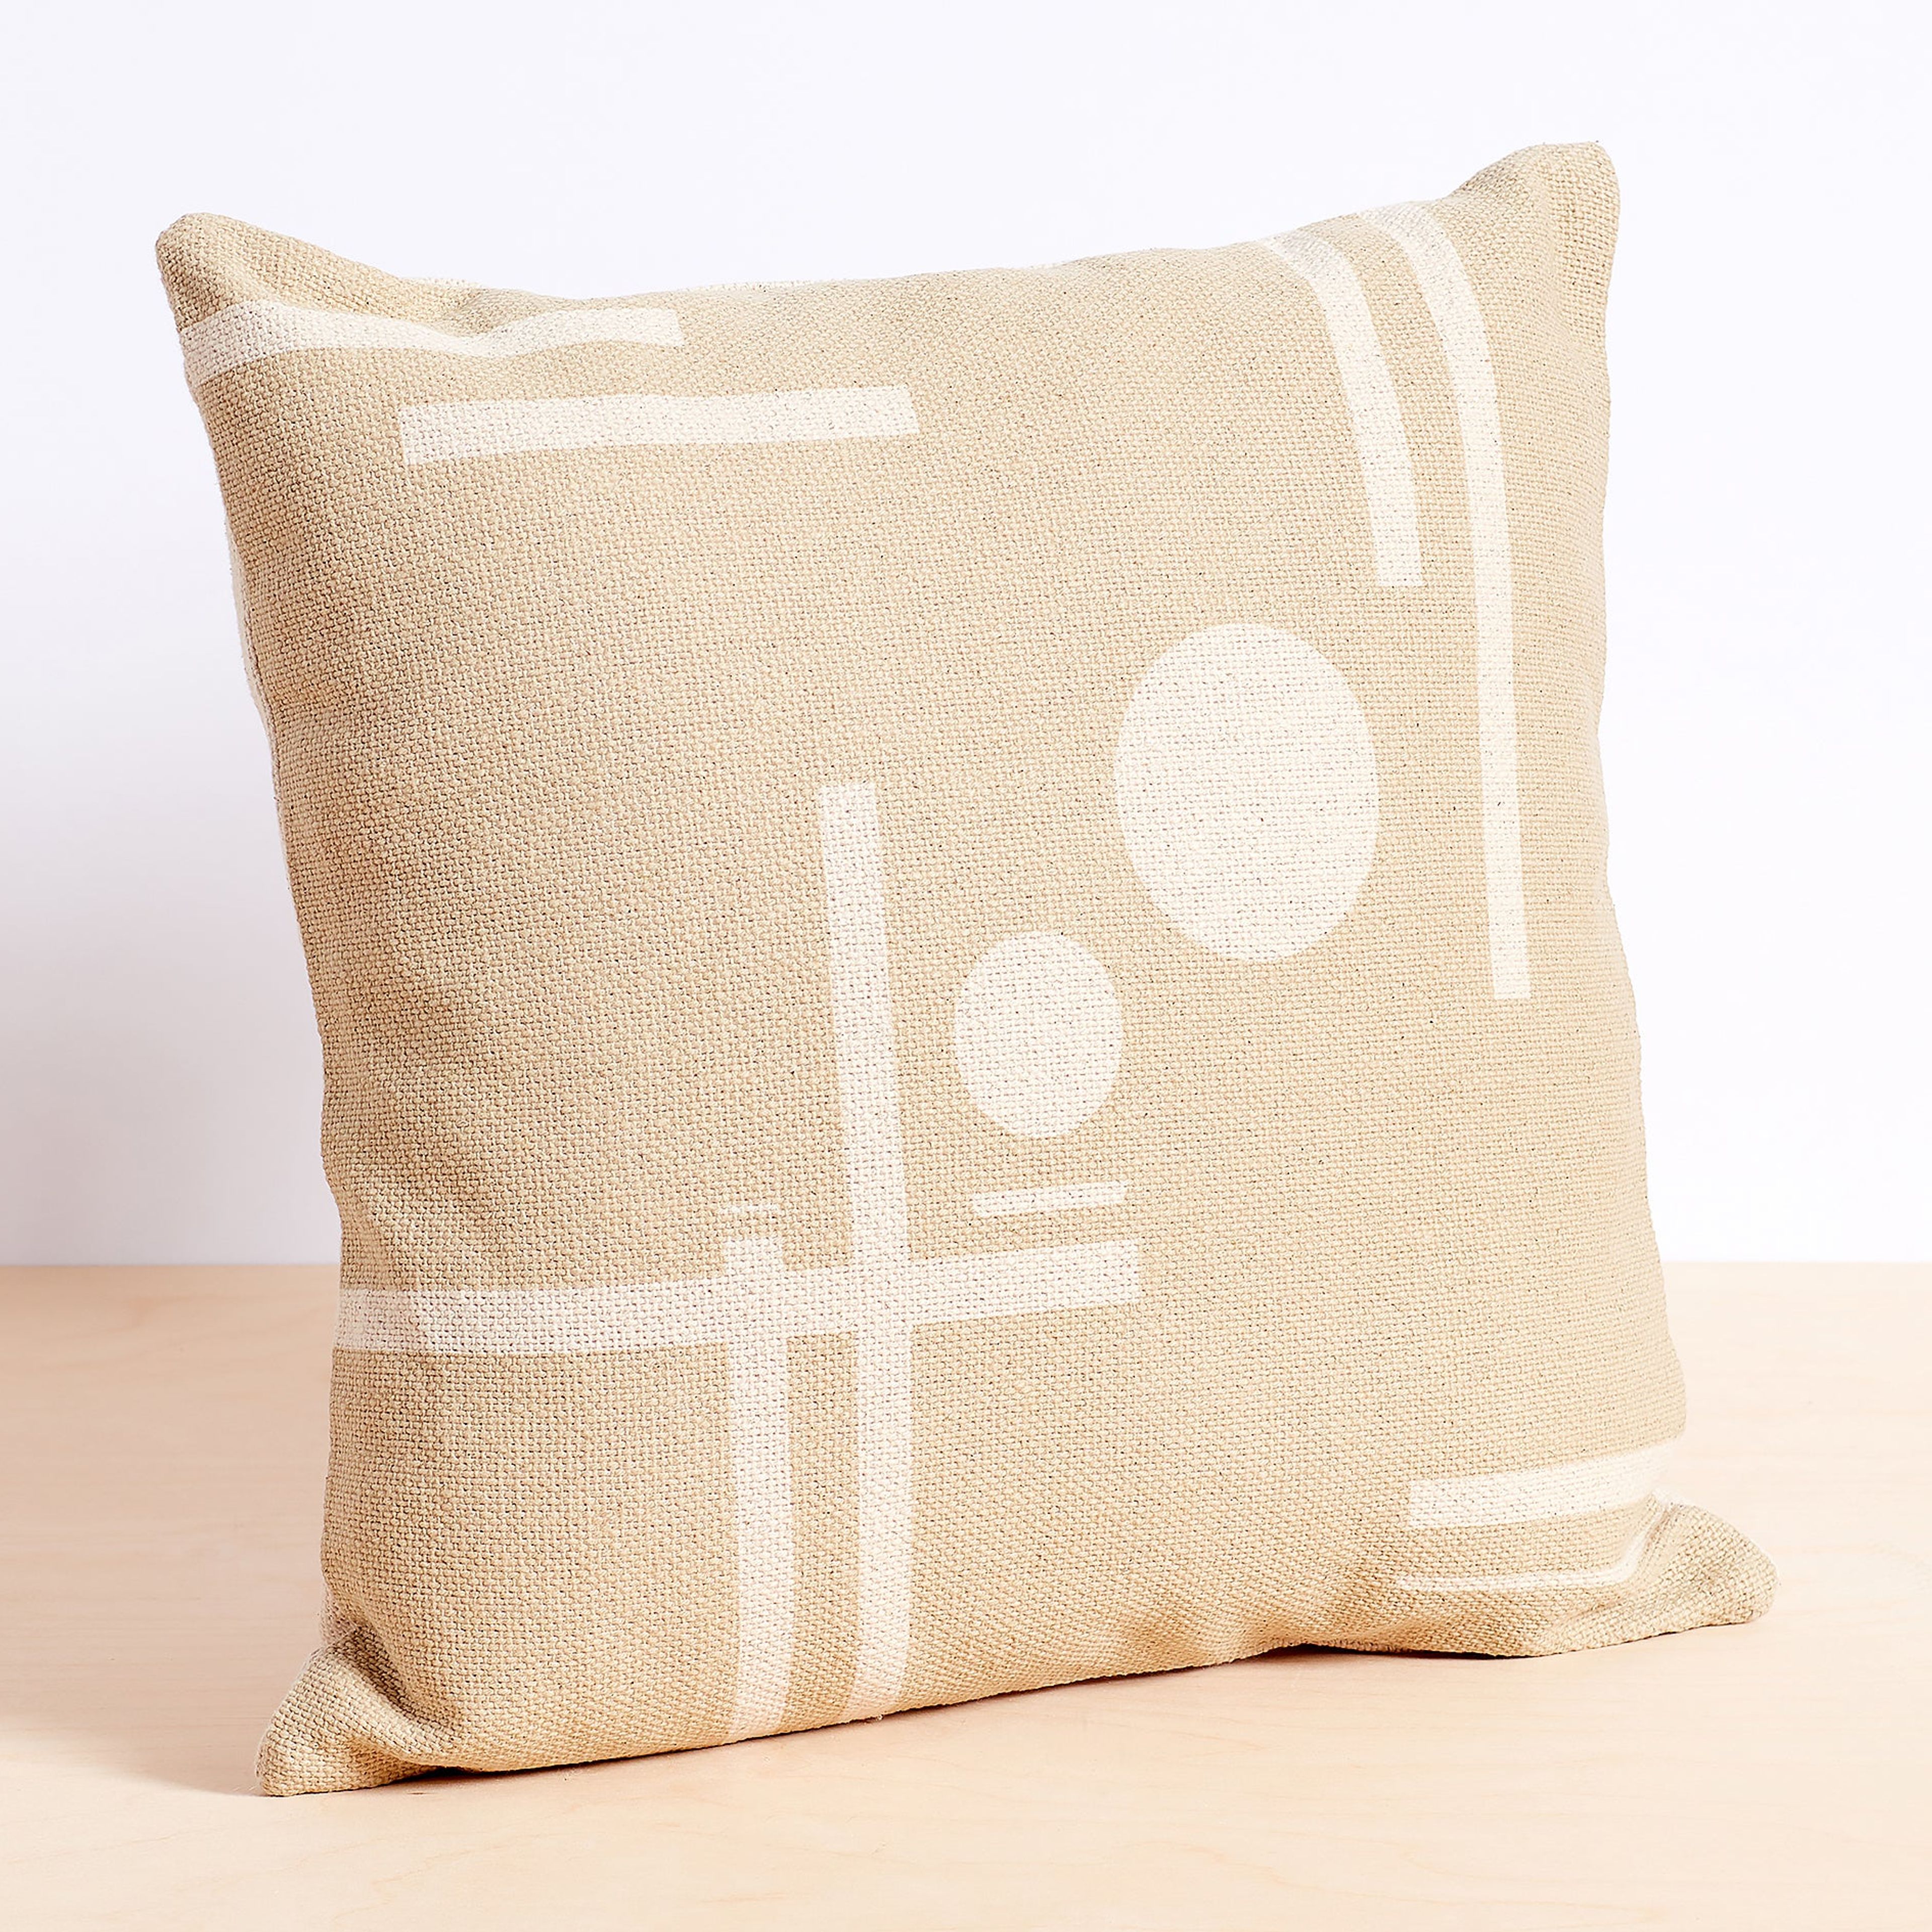 Printed Geo Textured Pillow